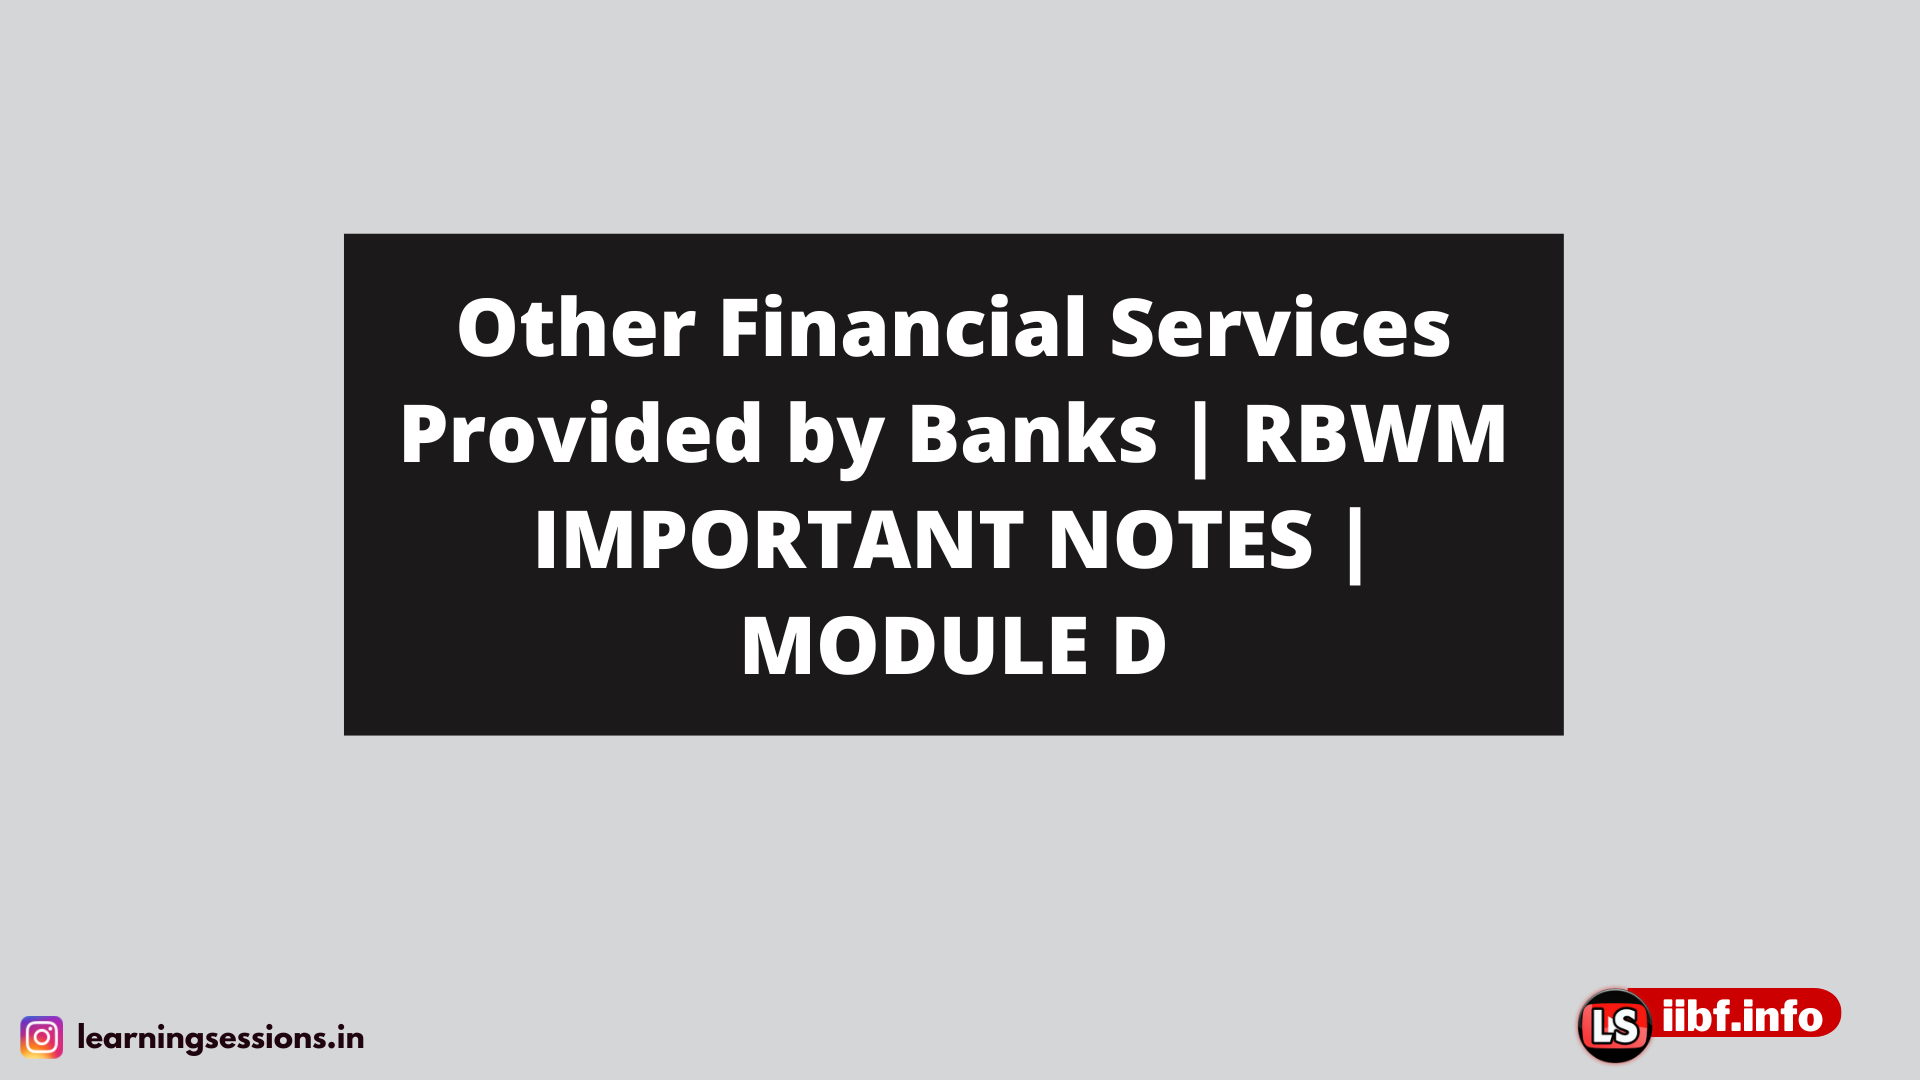 Other Financial Services Provided by Banks | RBWM IMPORTANT NOTES | MODULE D